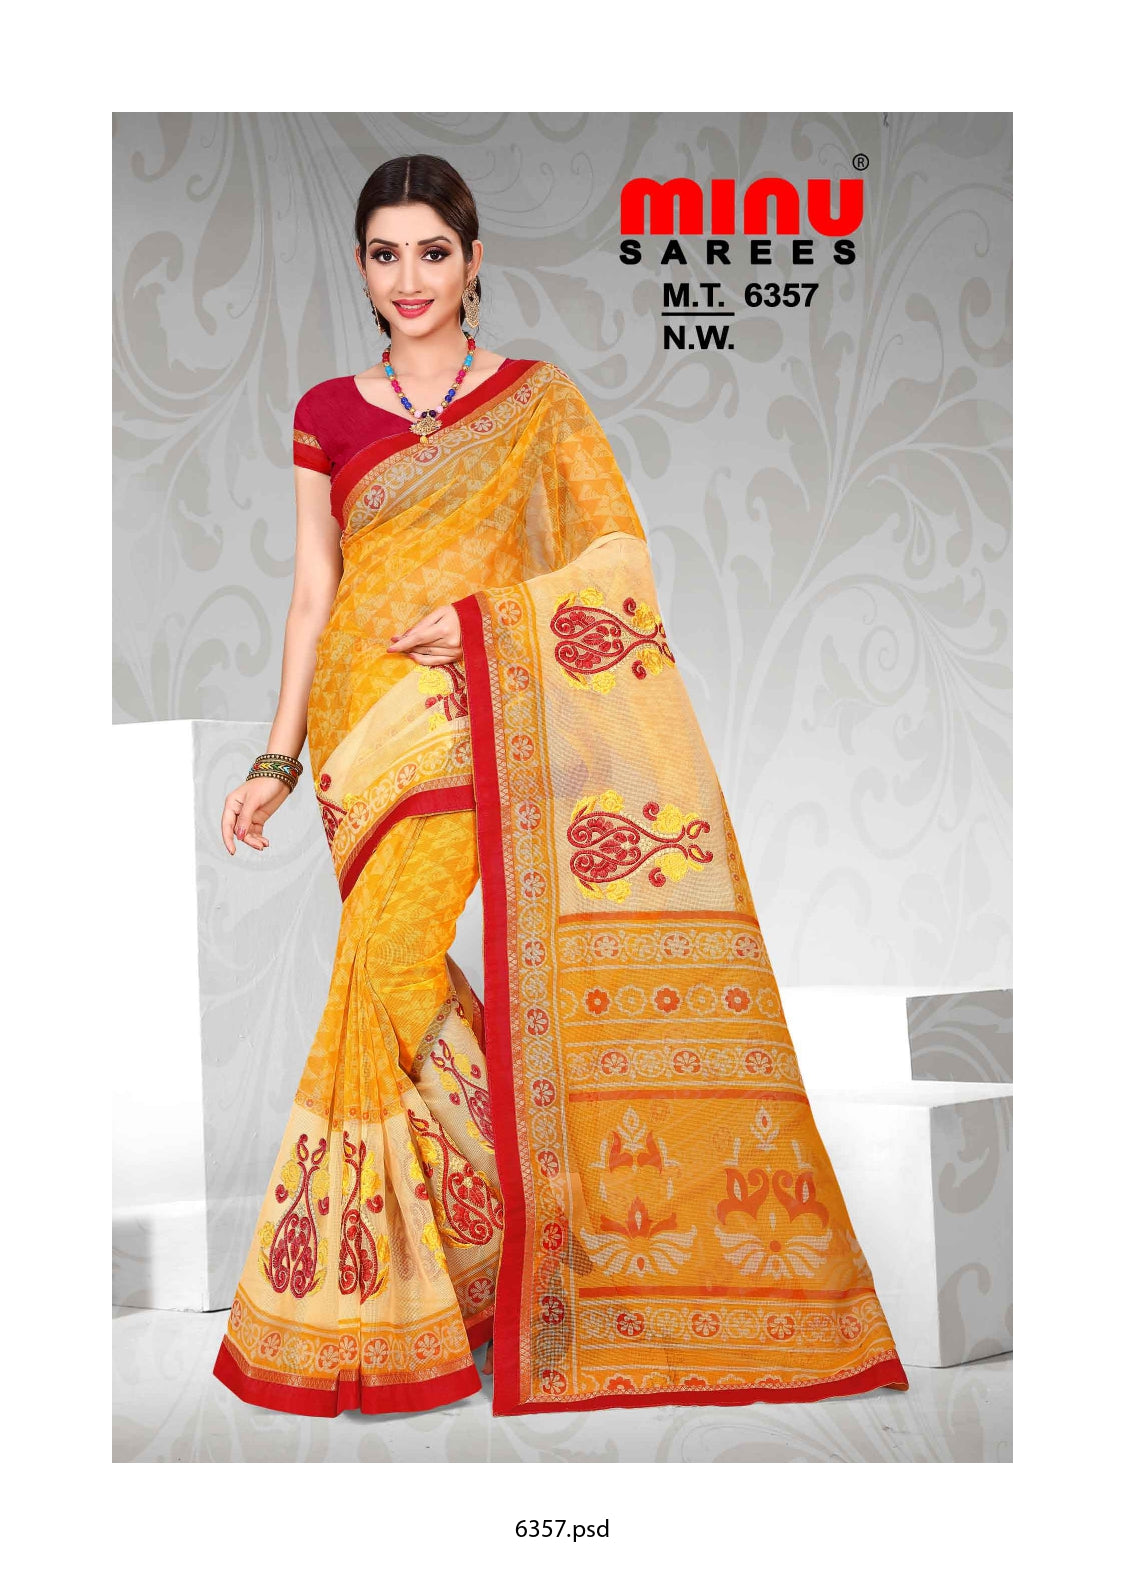 Woman posing in super gorgeous fancy saree for retailers